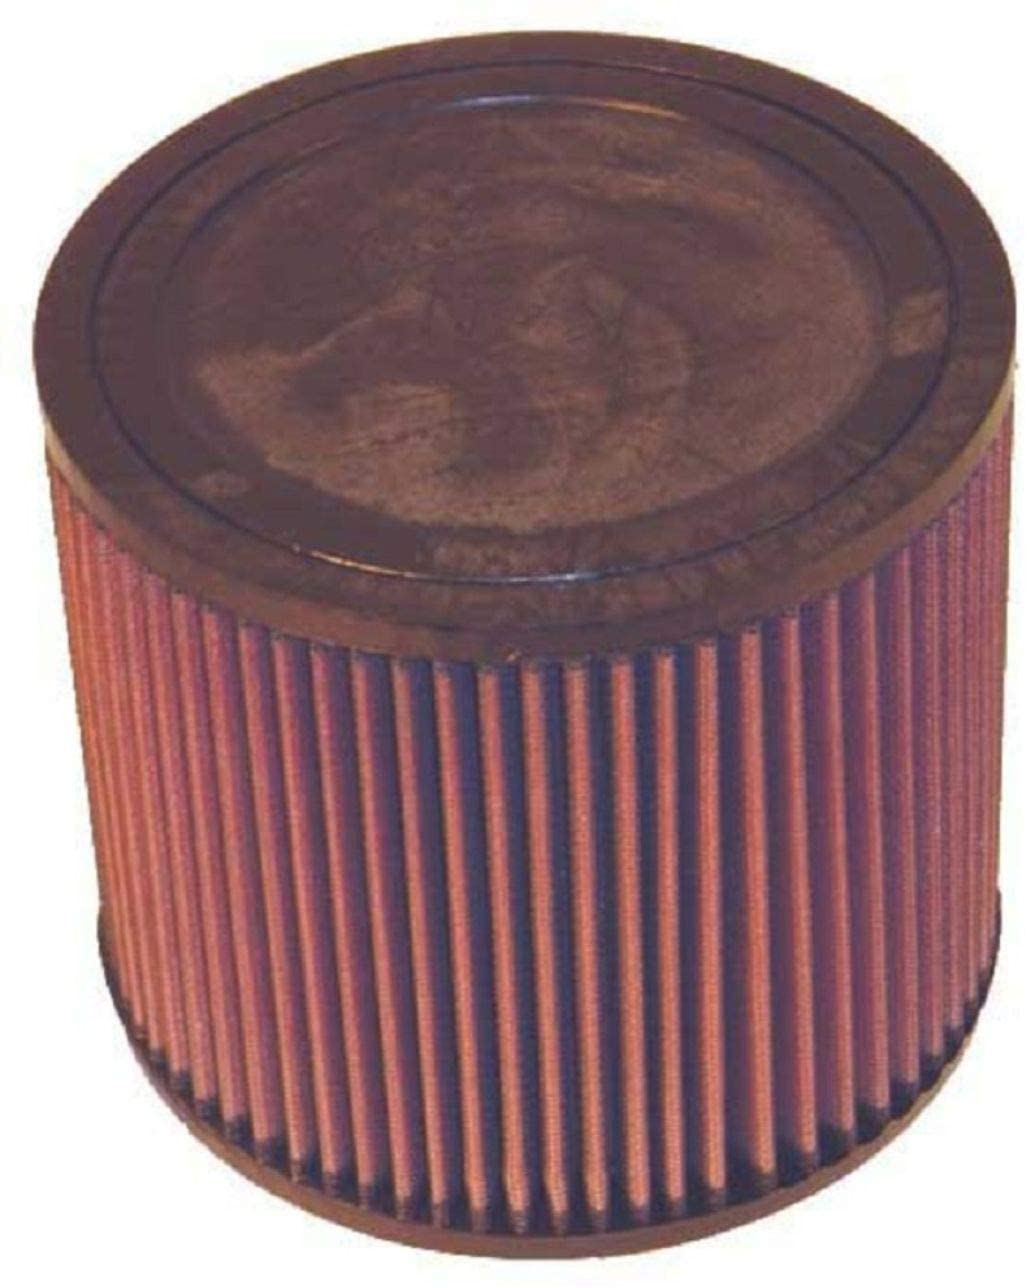 K&N Universal Clamp-On Air Filter: High Performance, Premium, Washable, Replacement Engine Filter: Flange Diameter: 4 In, Filter Height: 6 In, Flange Length: 1 In, Shape: Round, RD-1450